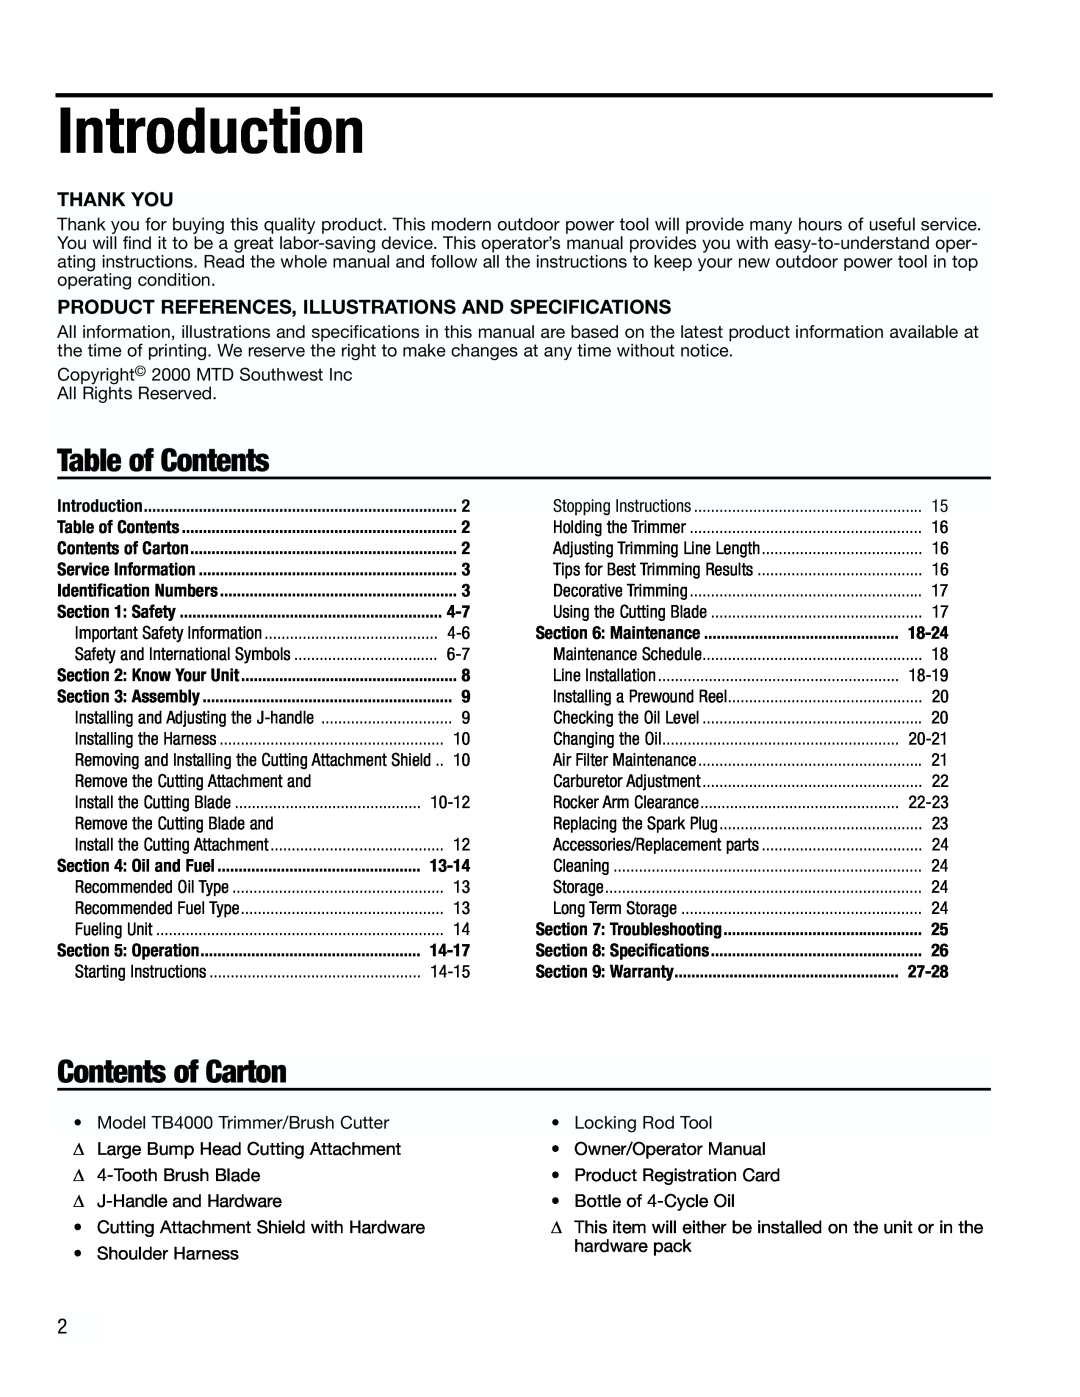 Troy-Bilt TB4000 manual Introduction, Table of Contents, Contents of Carton, Thank You 